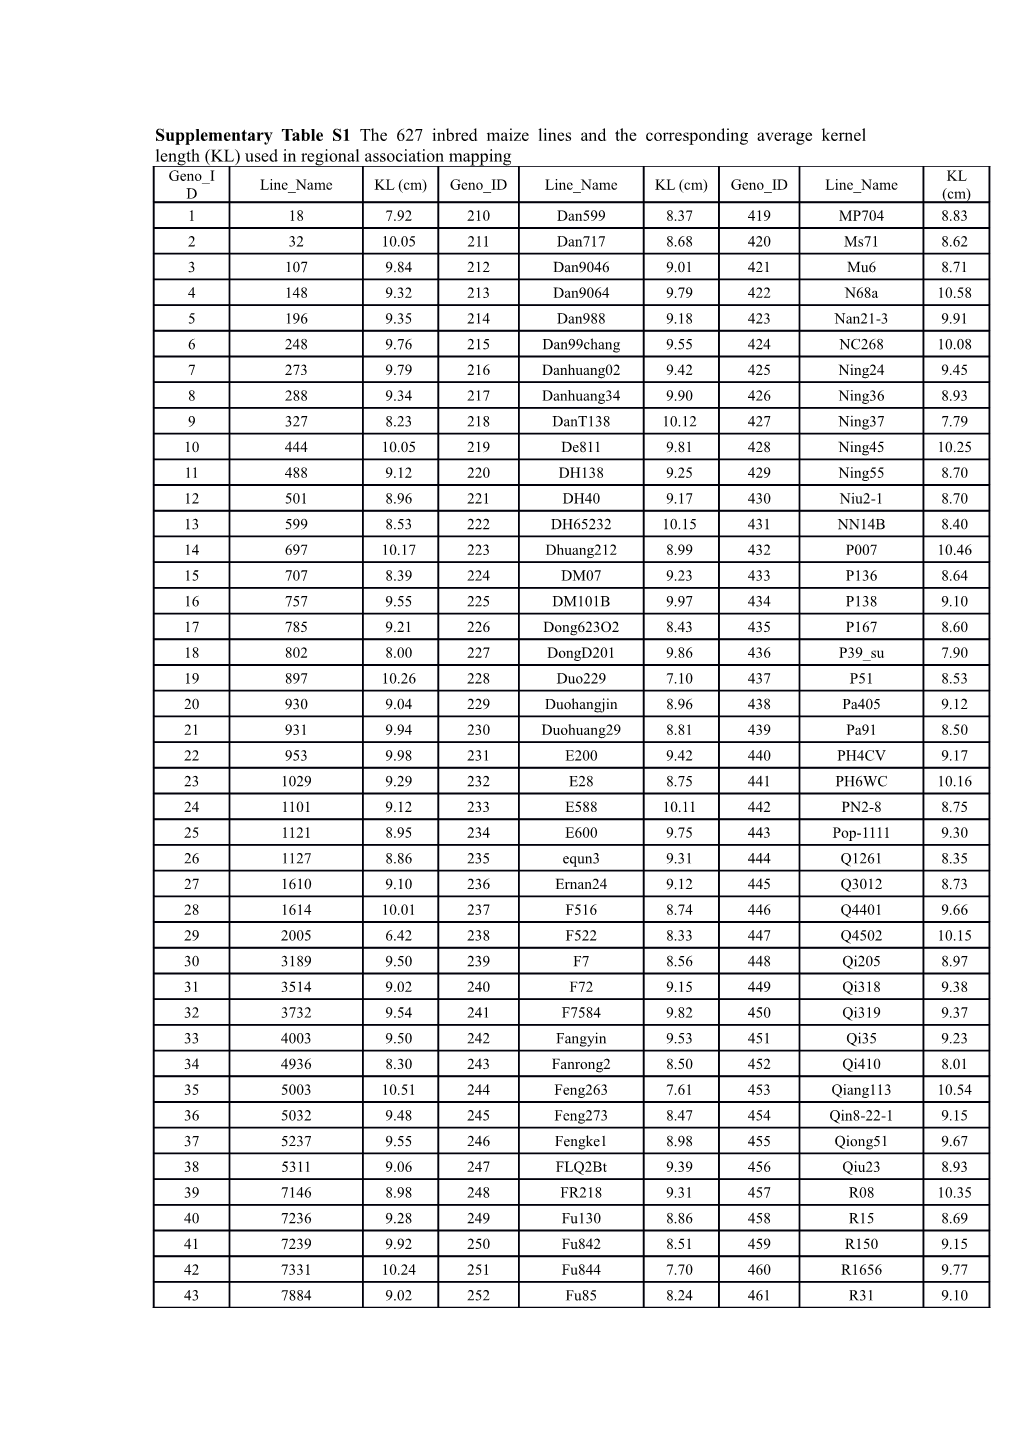 Supplementary Table S1 the 627 Inbred Maize Lines and the Corresponding Average Kernel